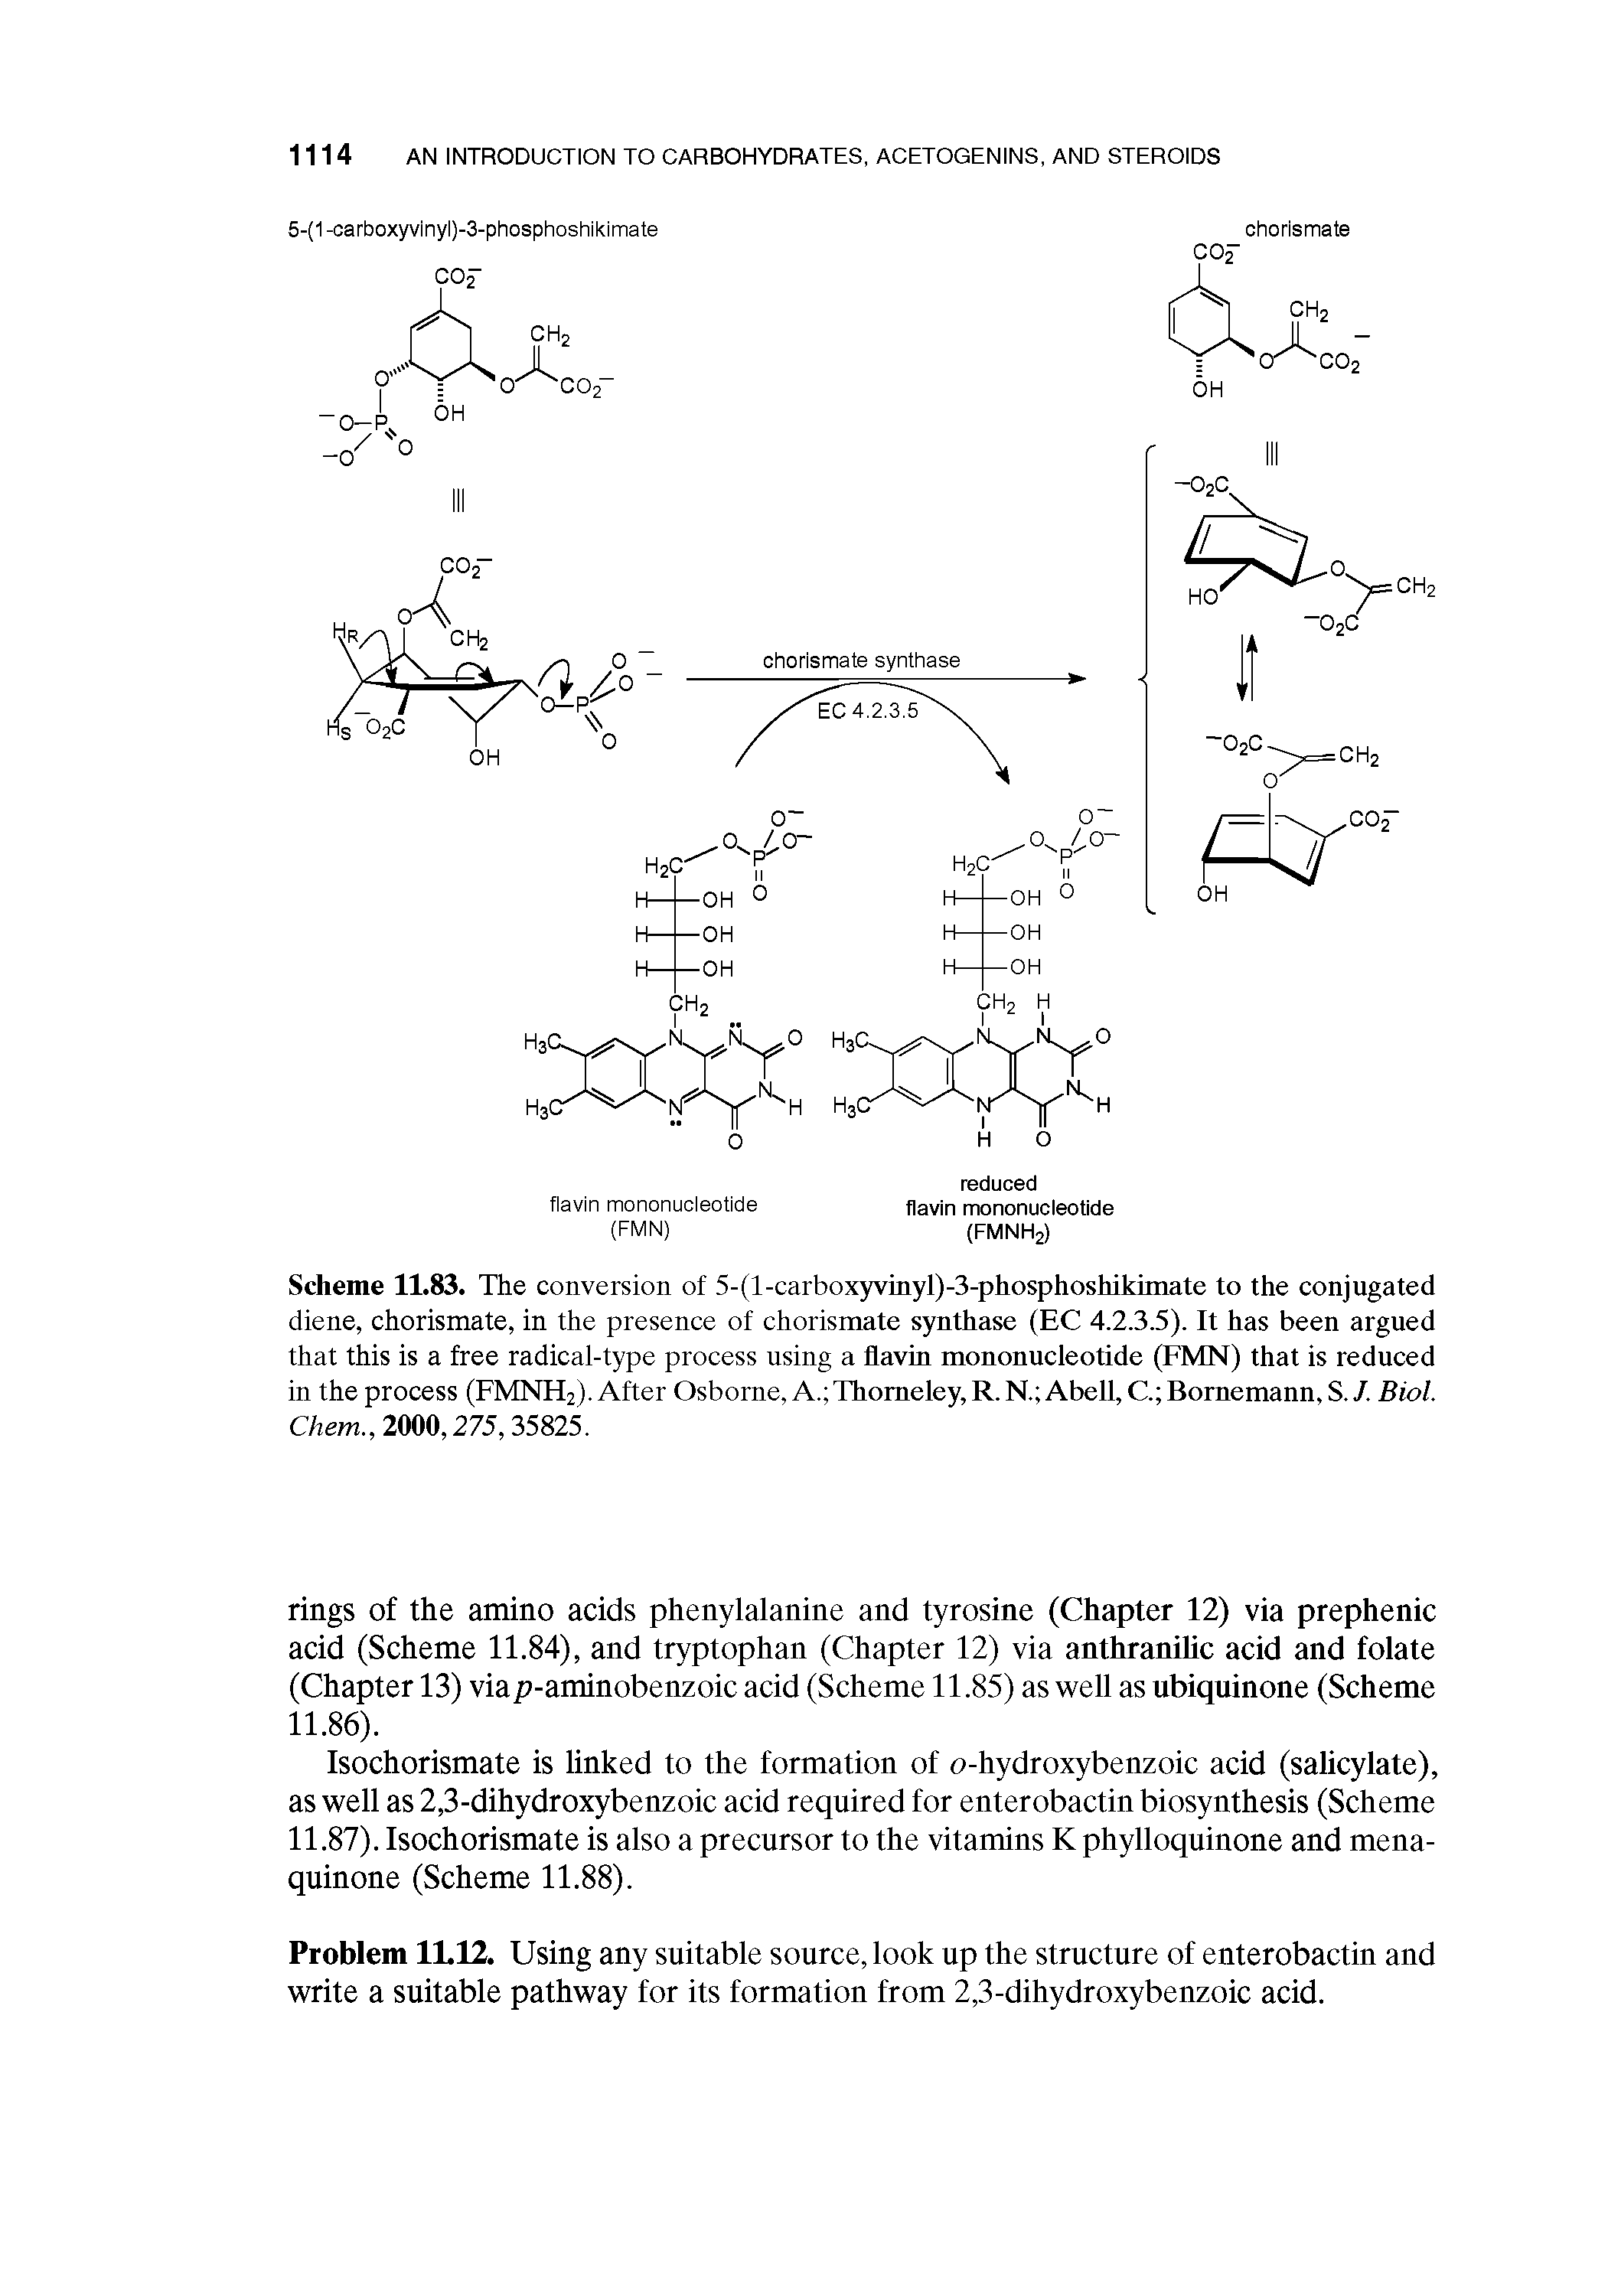 Scheme 11.83. The conversion of 5-(l-carboxyvmyl)-3-phosphoshikimate to the conjugated diene, chorismate, in the presence of chorismate synthase (EC 4.2.3.5). It has been argued that this is a free radical-type process using a flavin mononucleotide (FMN) that is reduced in the process (FMNH2). After Osborne, A. Thomeley, R. N. Abell, C Bornemann, S. /. Biol. Chem.,im,275,35825.